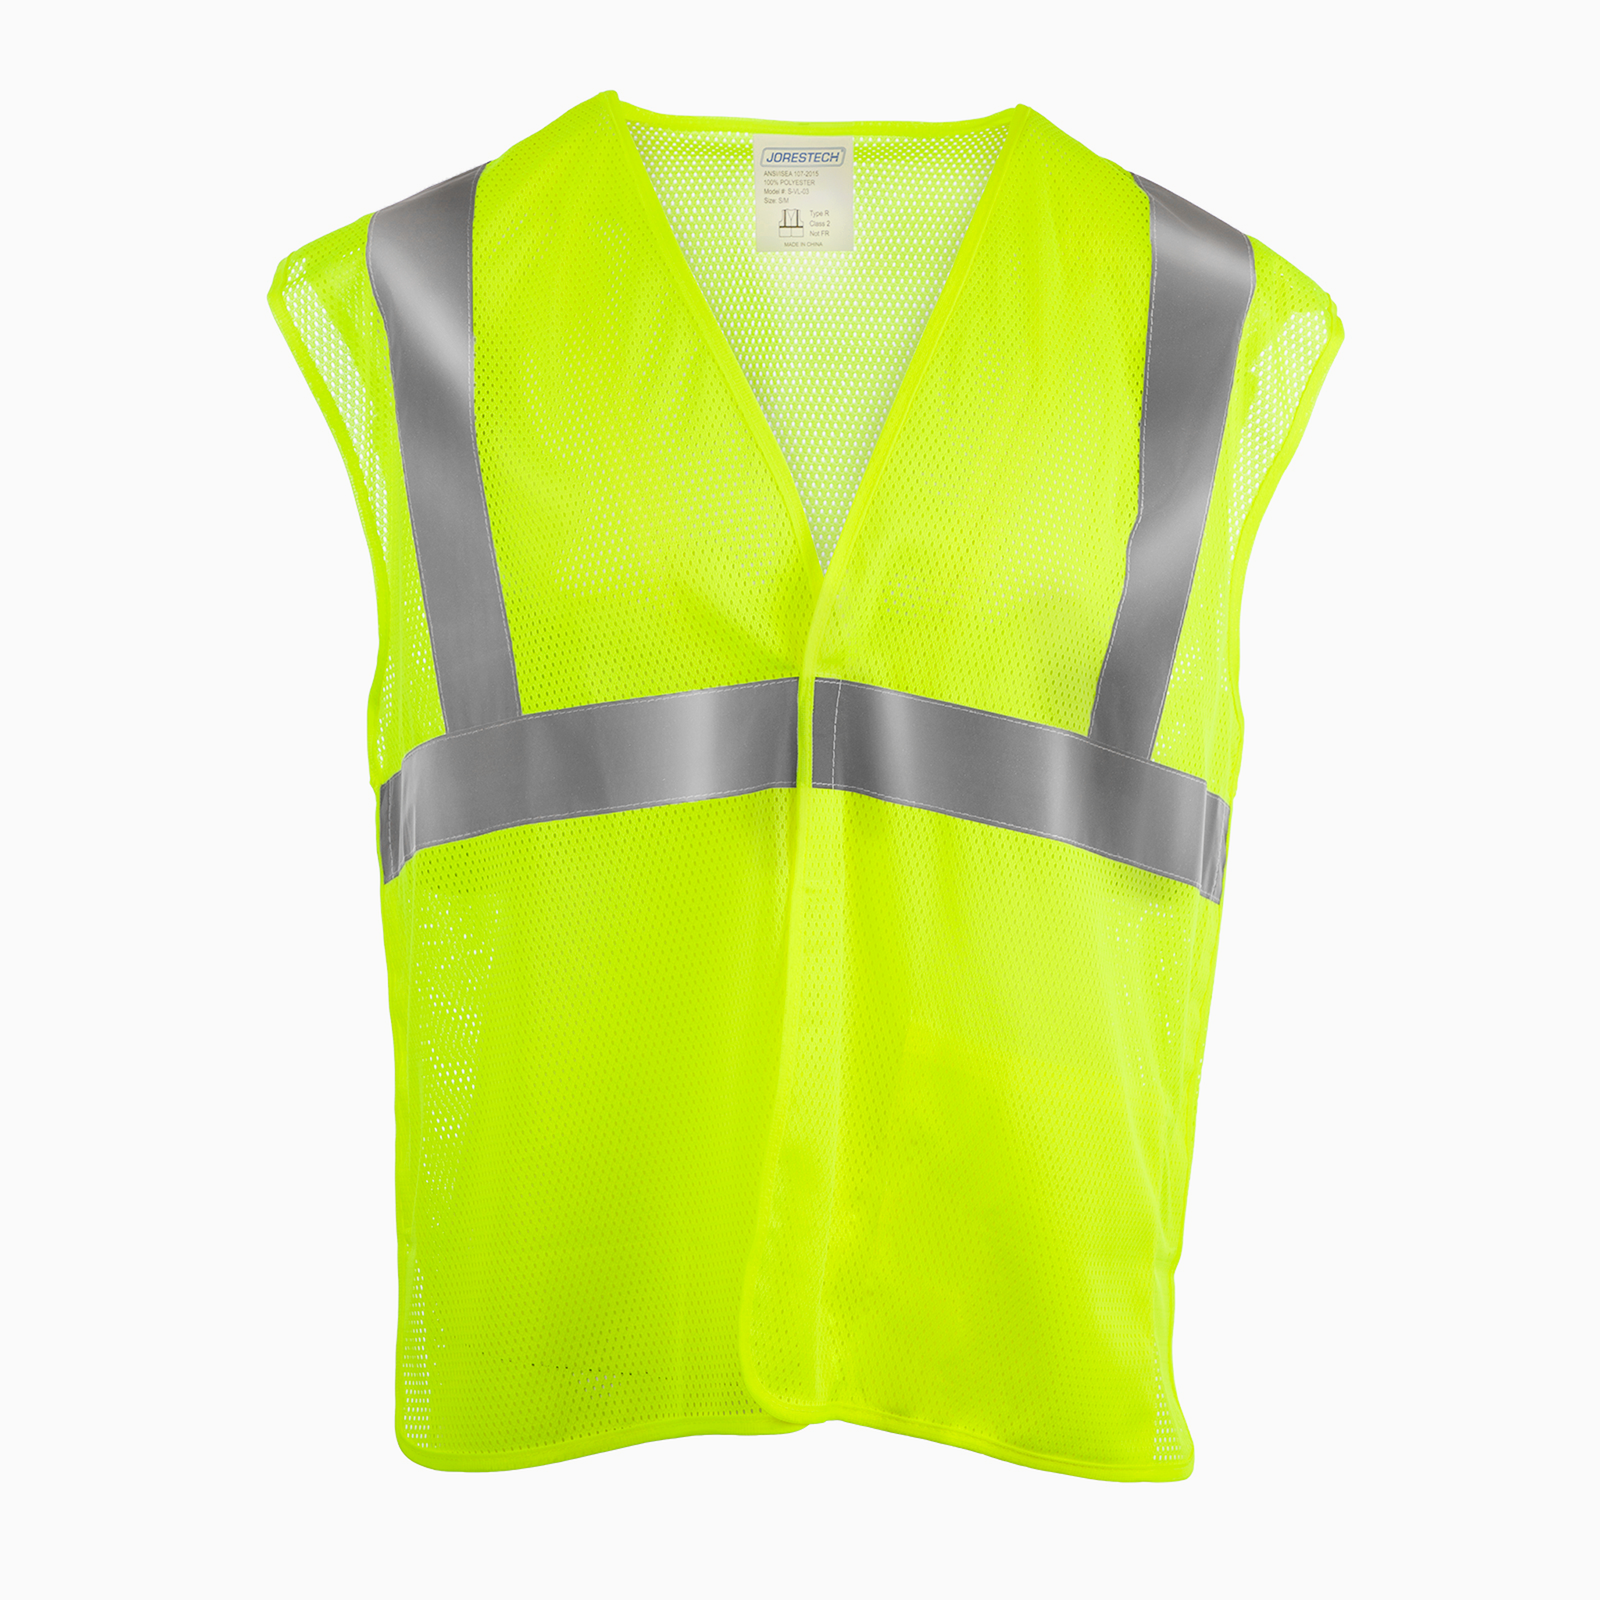 front view of the lime/yellow tearaway safety vest Class 2 type R 